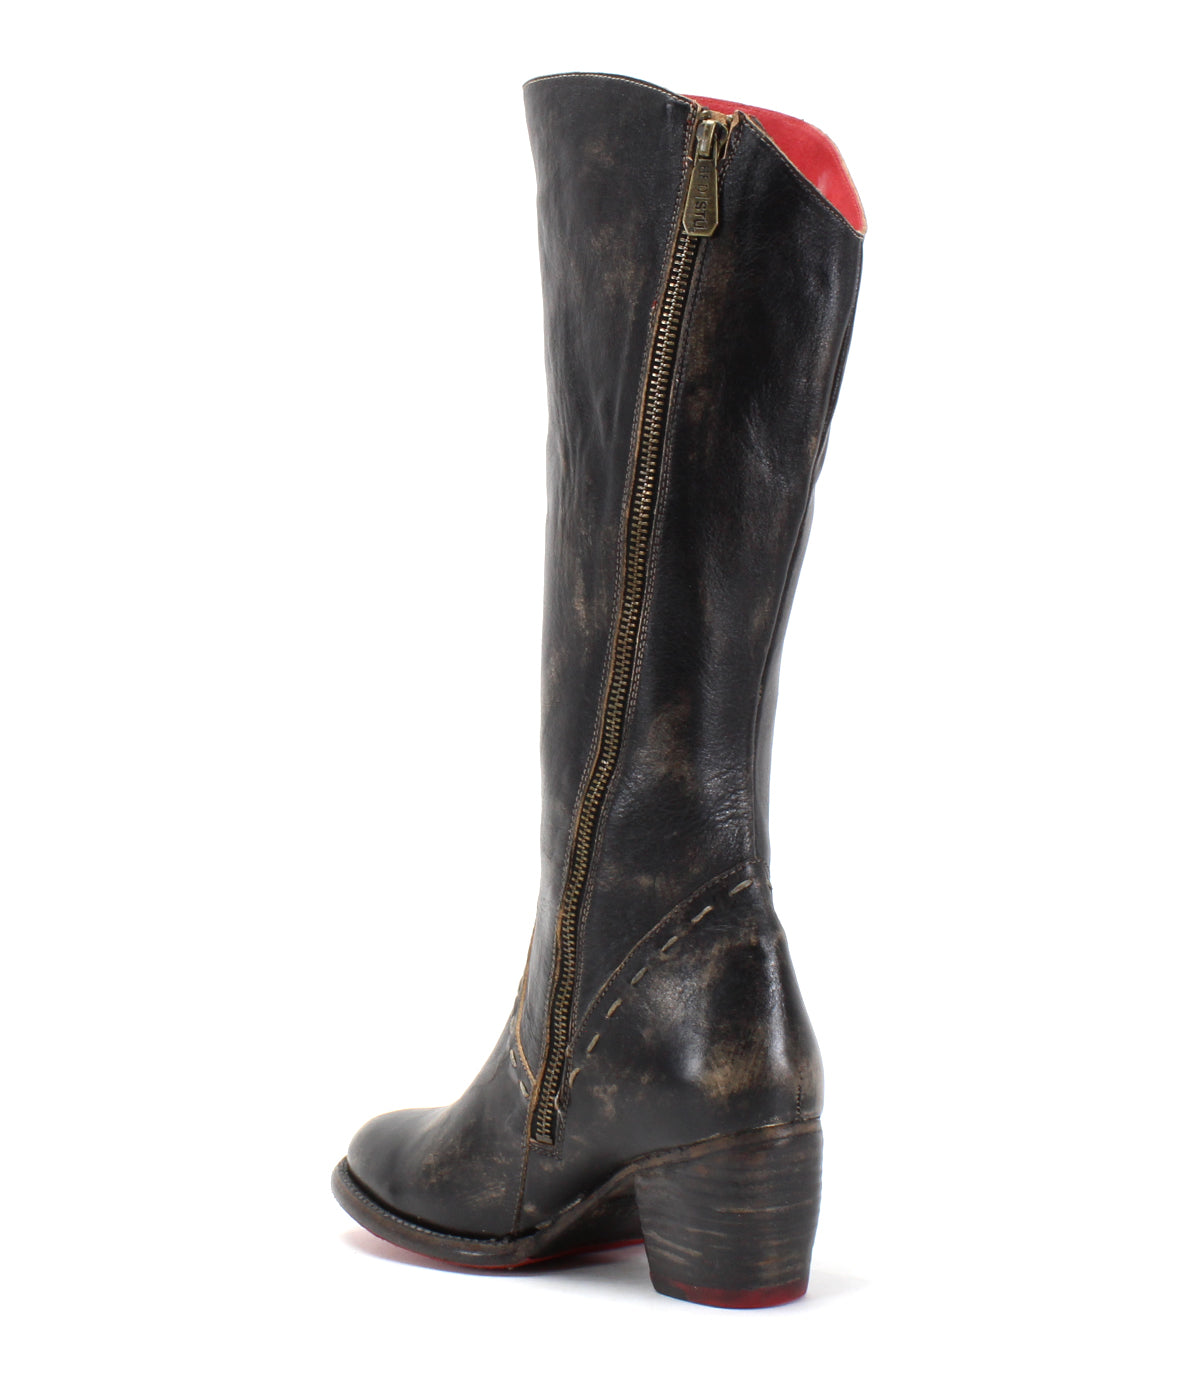 A women's distressed black tall Charis boot with a red sole from Bed Stu.